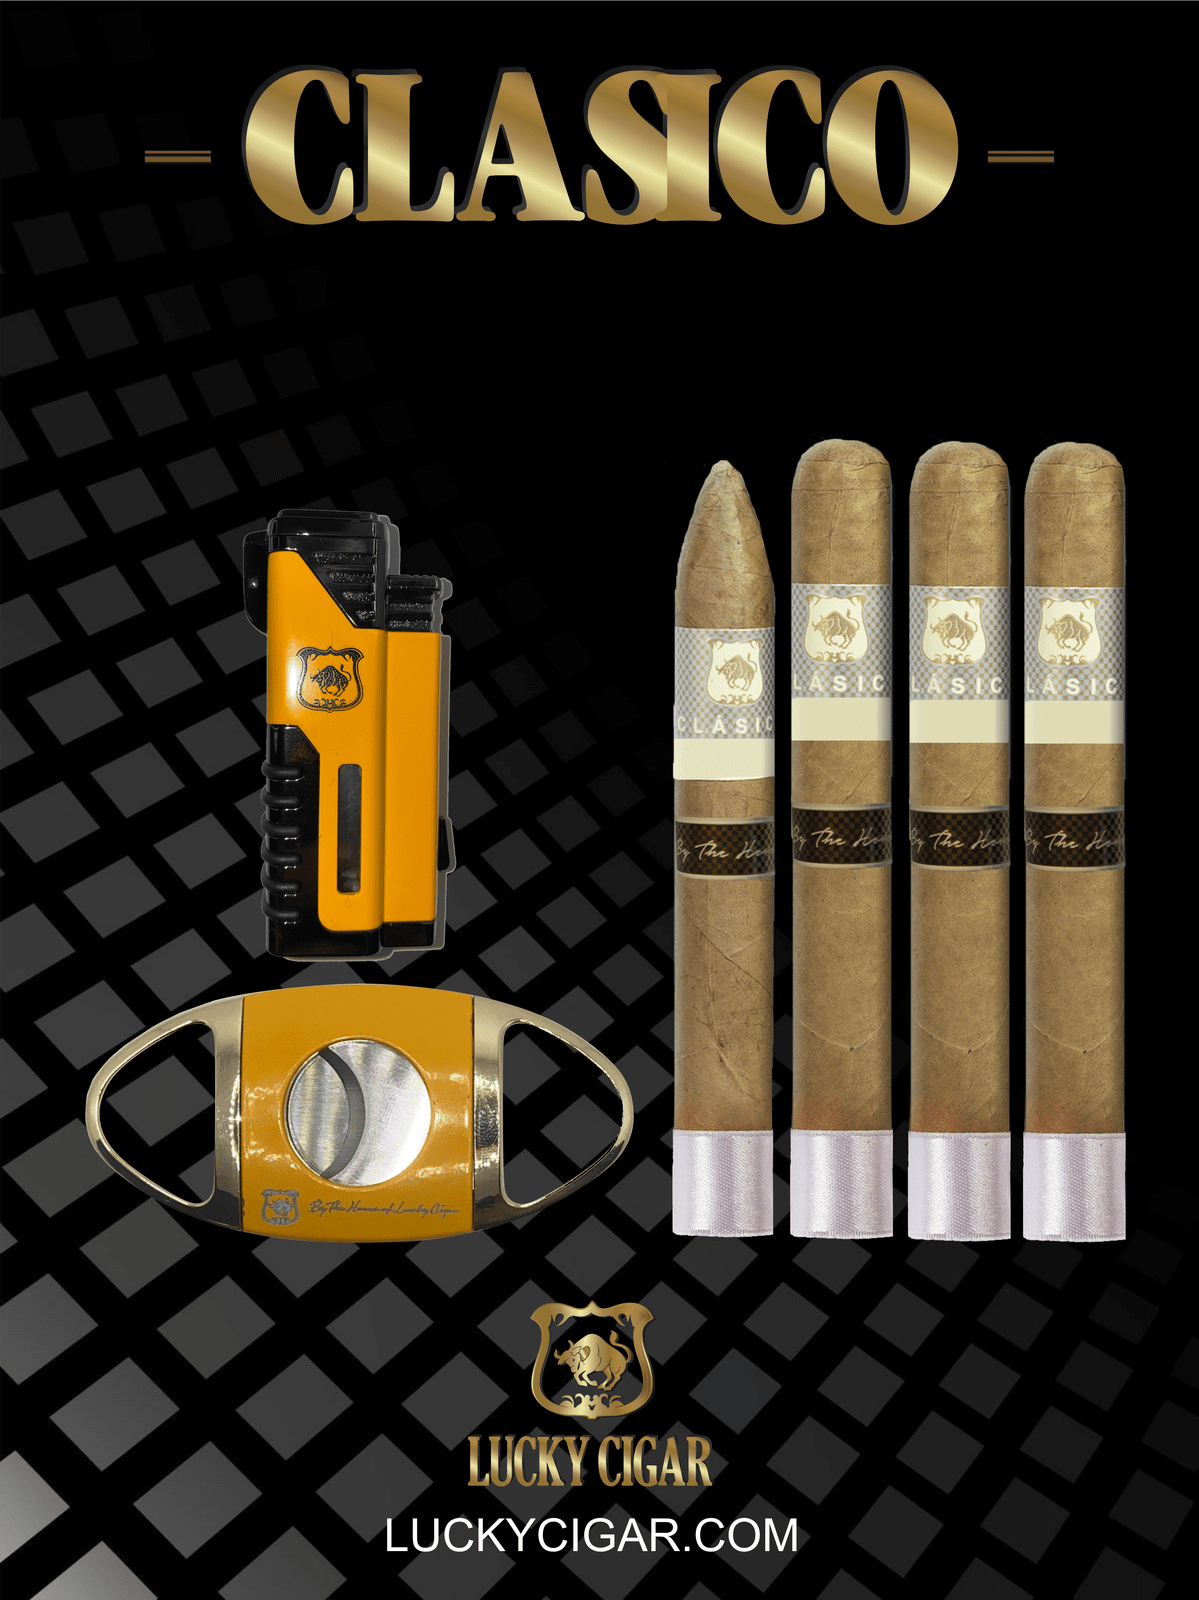 Lucky Cigar Sampler Sets: Set of 4 Classico Cigars with Torch, Cutter 1 Classico Torpedo 6x52 3 Classico Toro 6x50